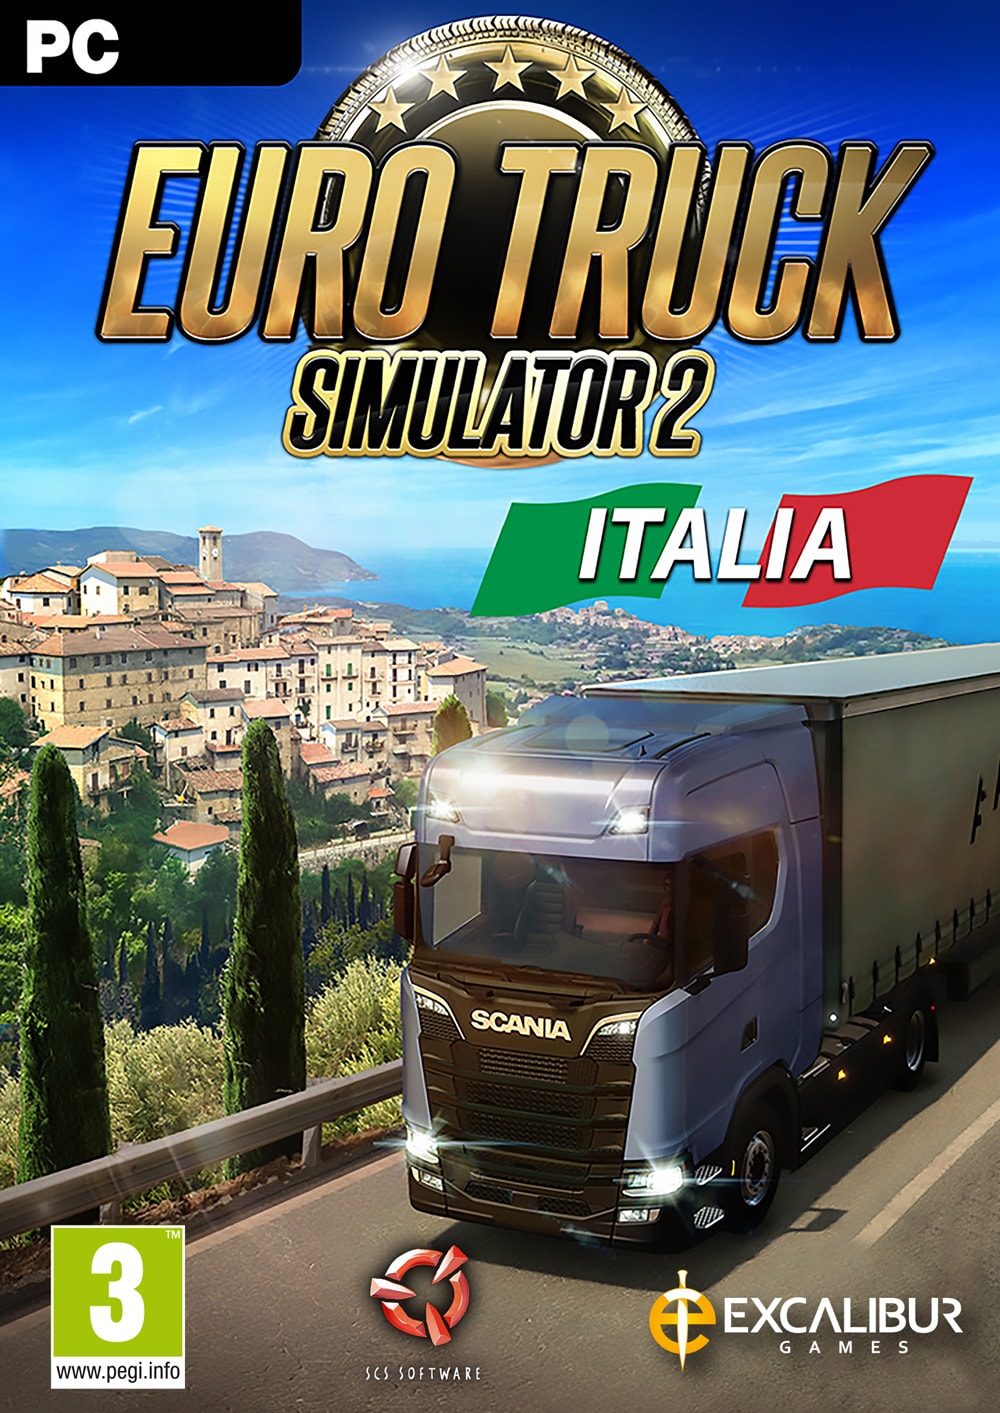 💻EURO TRUCK SIMULATOR 2 DOWNLOAD PC  HOW TO DOWNLOAD AND INSTALL EURO  TRUCK SIMULATOR 2 PC & LAPTOP 